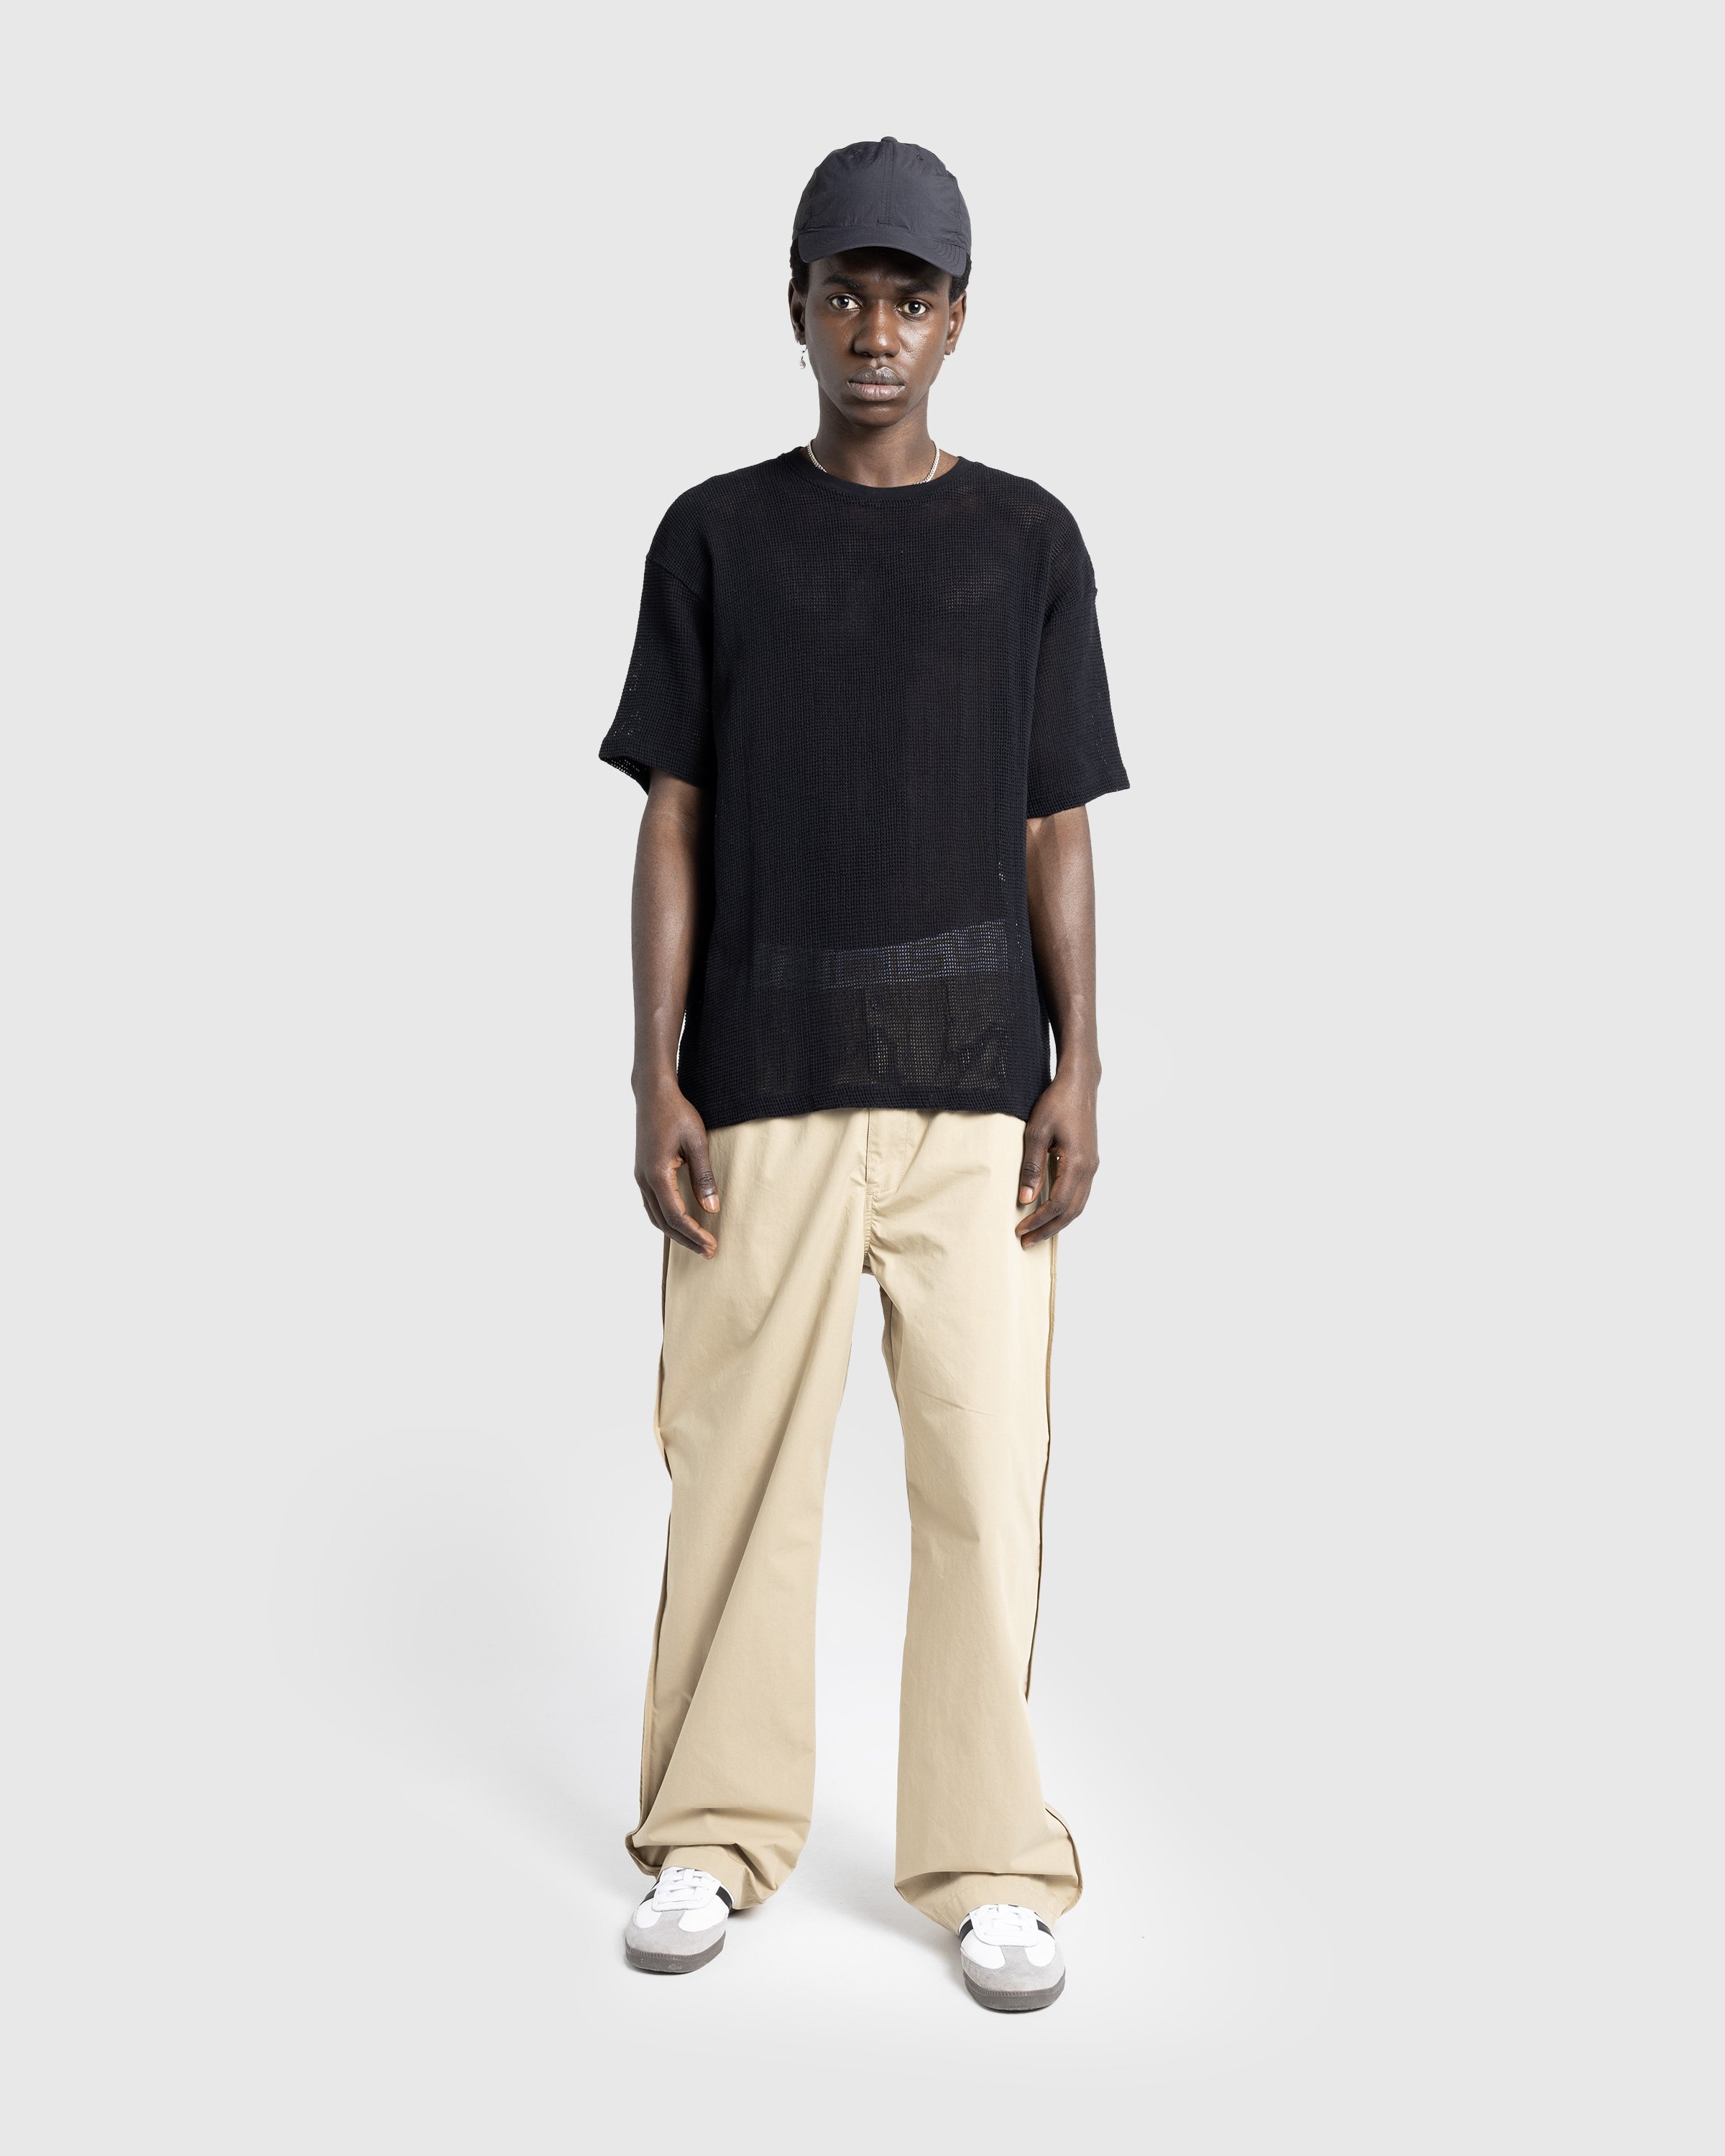 Highsnobiety HS05 - Pigment Dyed Cotton Mesh Knit - Clothing -  - Image 4